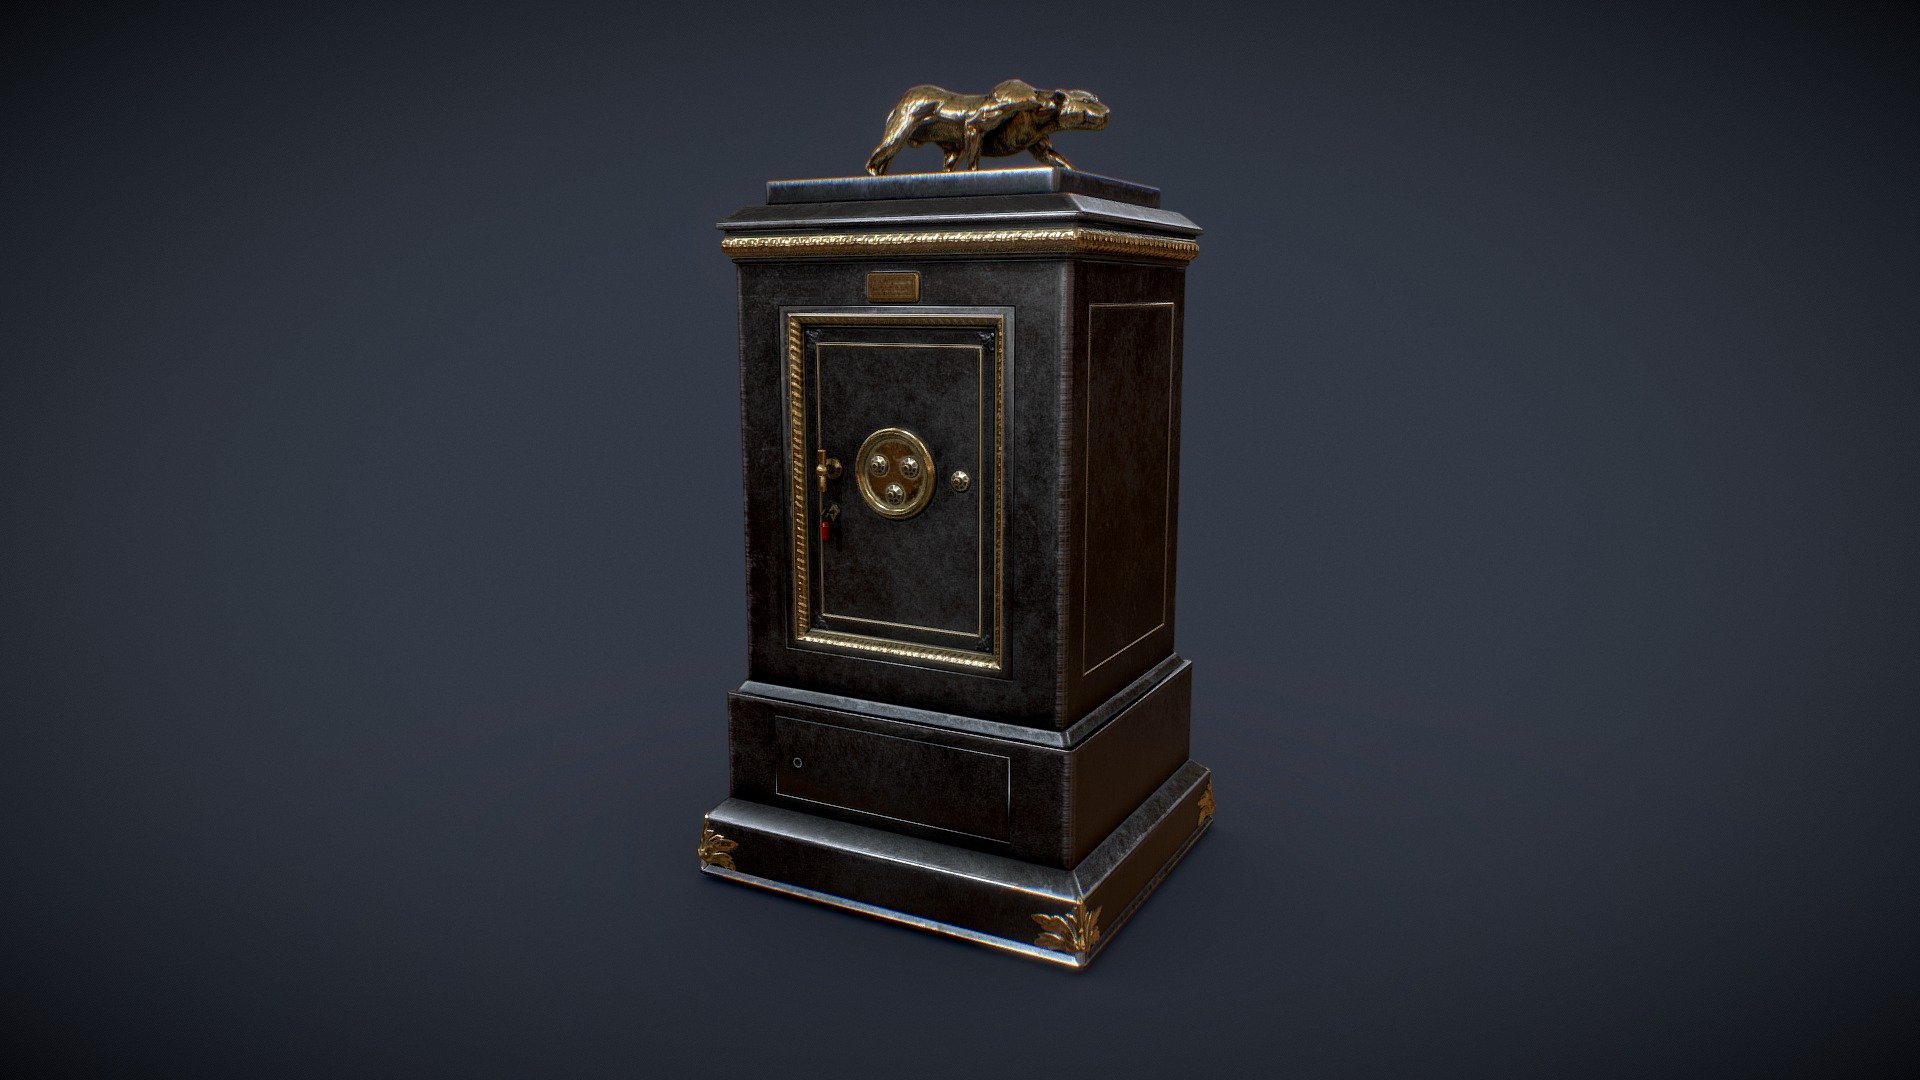 Hello all:) This is a new props for a victorian project, a safety chest to store some valuable things. Migth update a bit the top sculpture in the futur when I get some time, but still, ready to use!

Made with Maya, PS and Substance.

You will find in the package Scene file, FBX and 4k Textures.
If you have any customs need, please feel free to contact me 3d model